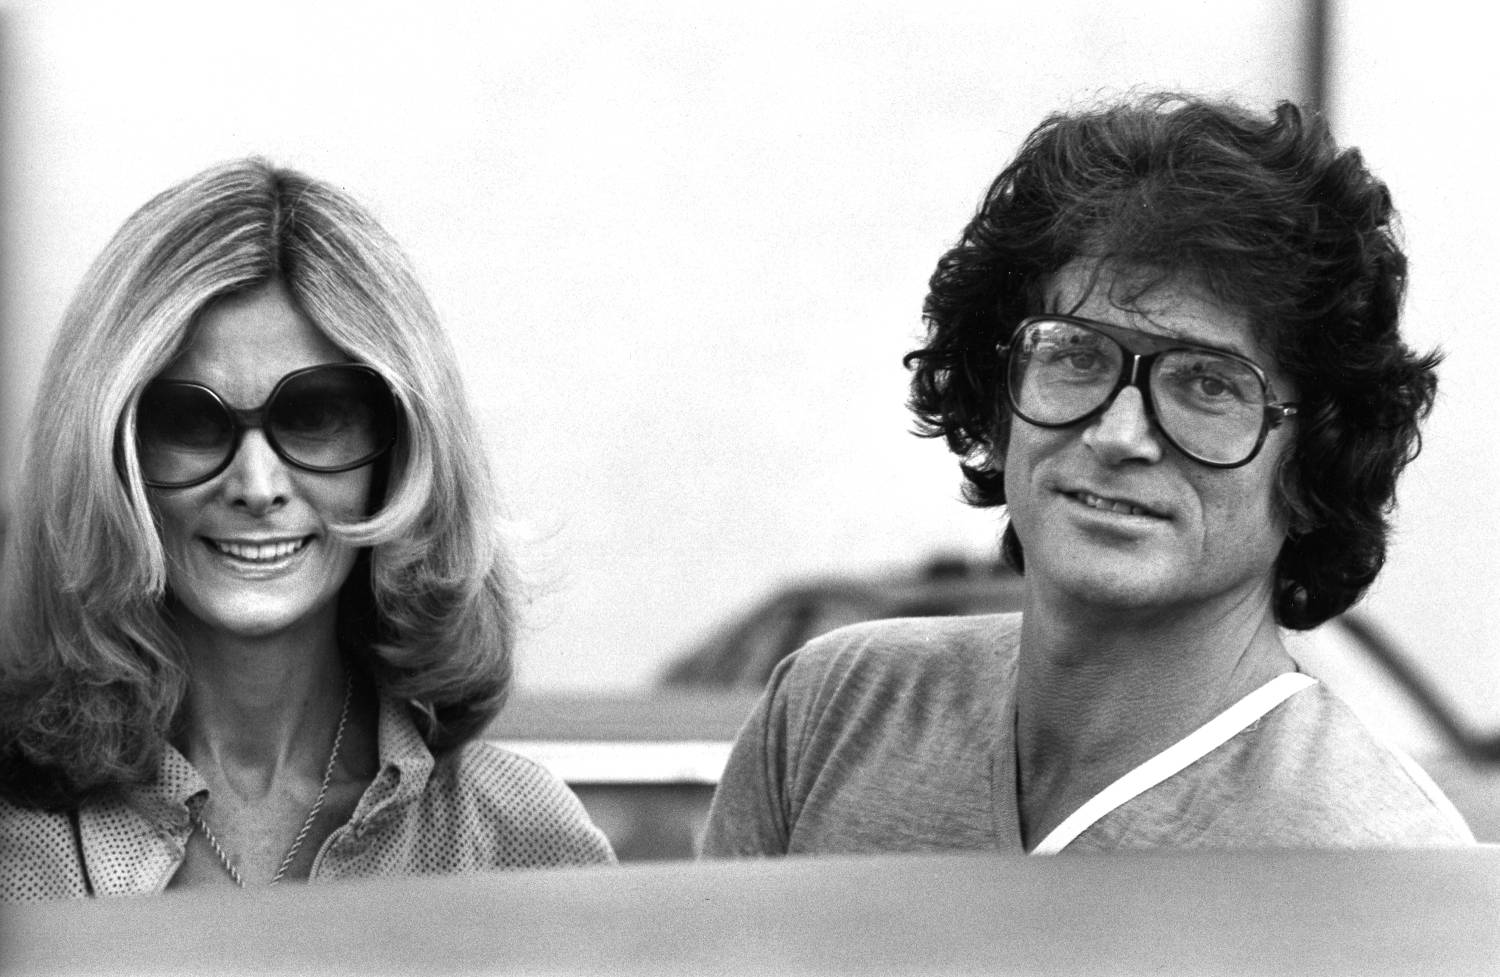 BEVERLY HILLS, CA - FEBRUARY 9: Actor Michael Landon and wife Lynn Noe sighted on February 9, 1979 on Rodeo Drive in Beverly Hills, California.